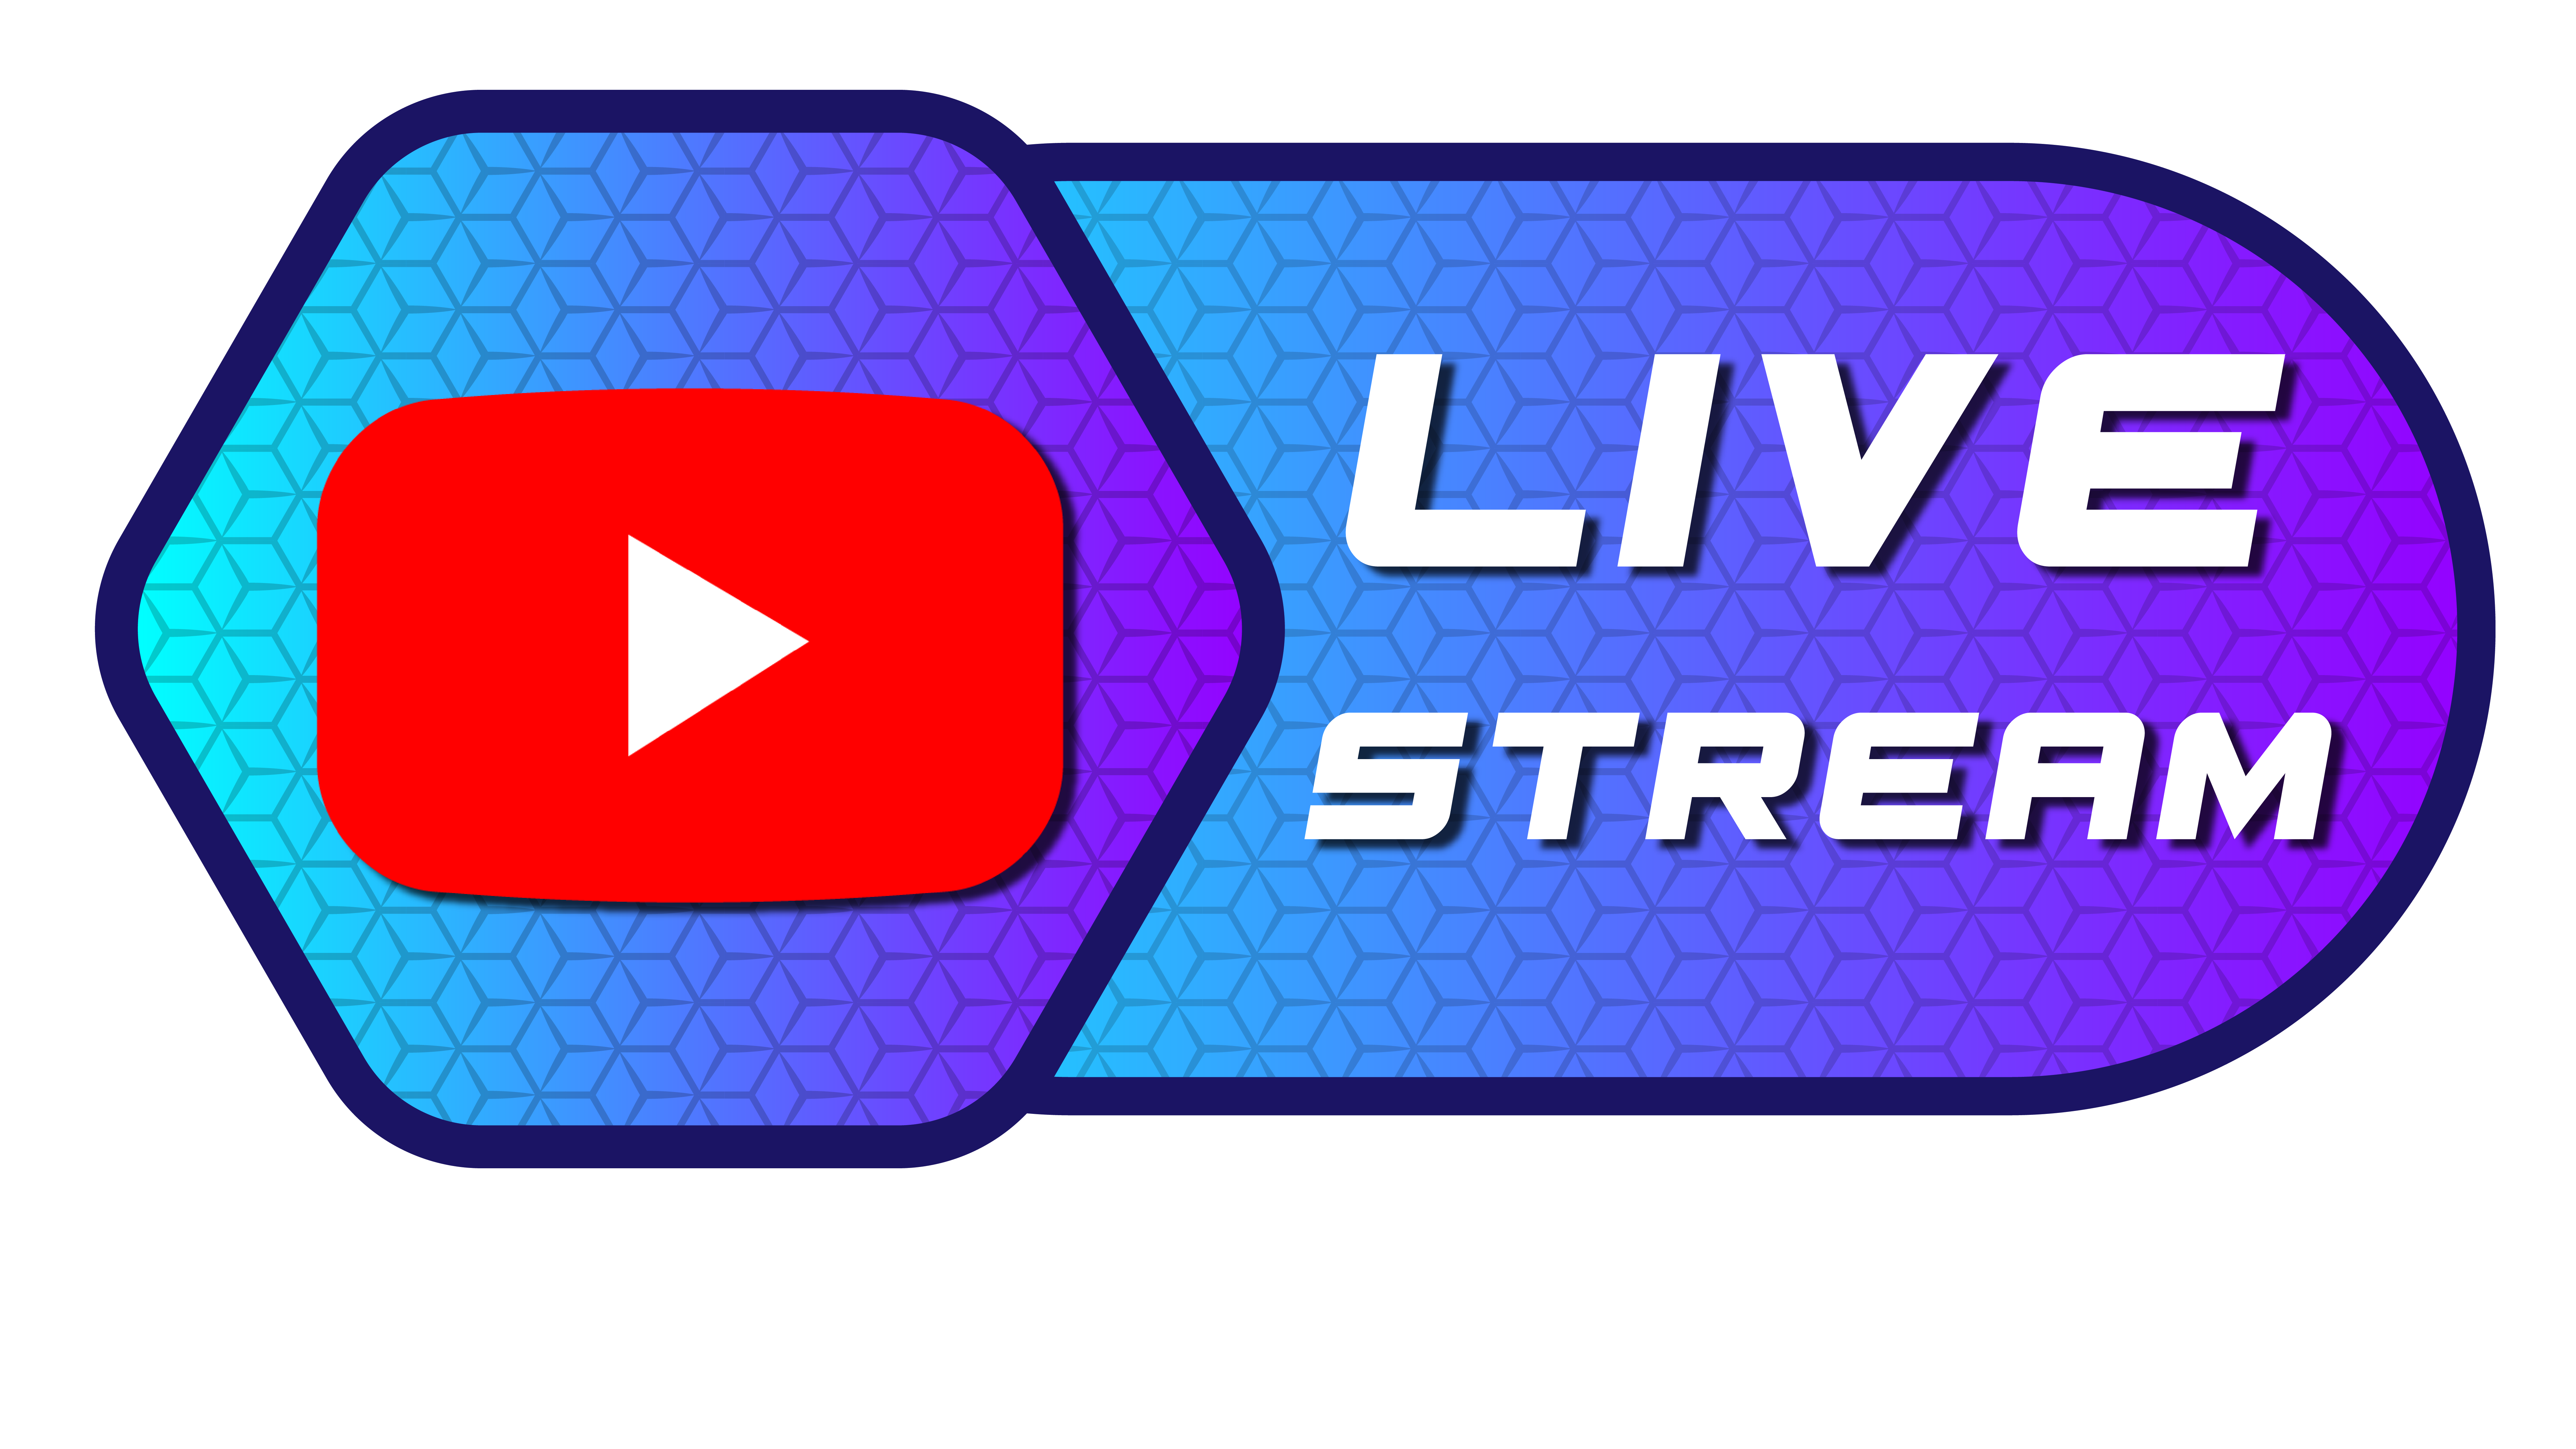 Live HD PNG image with Transparent Background